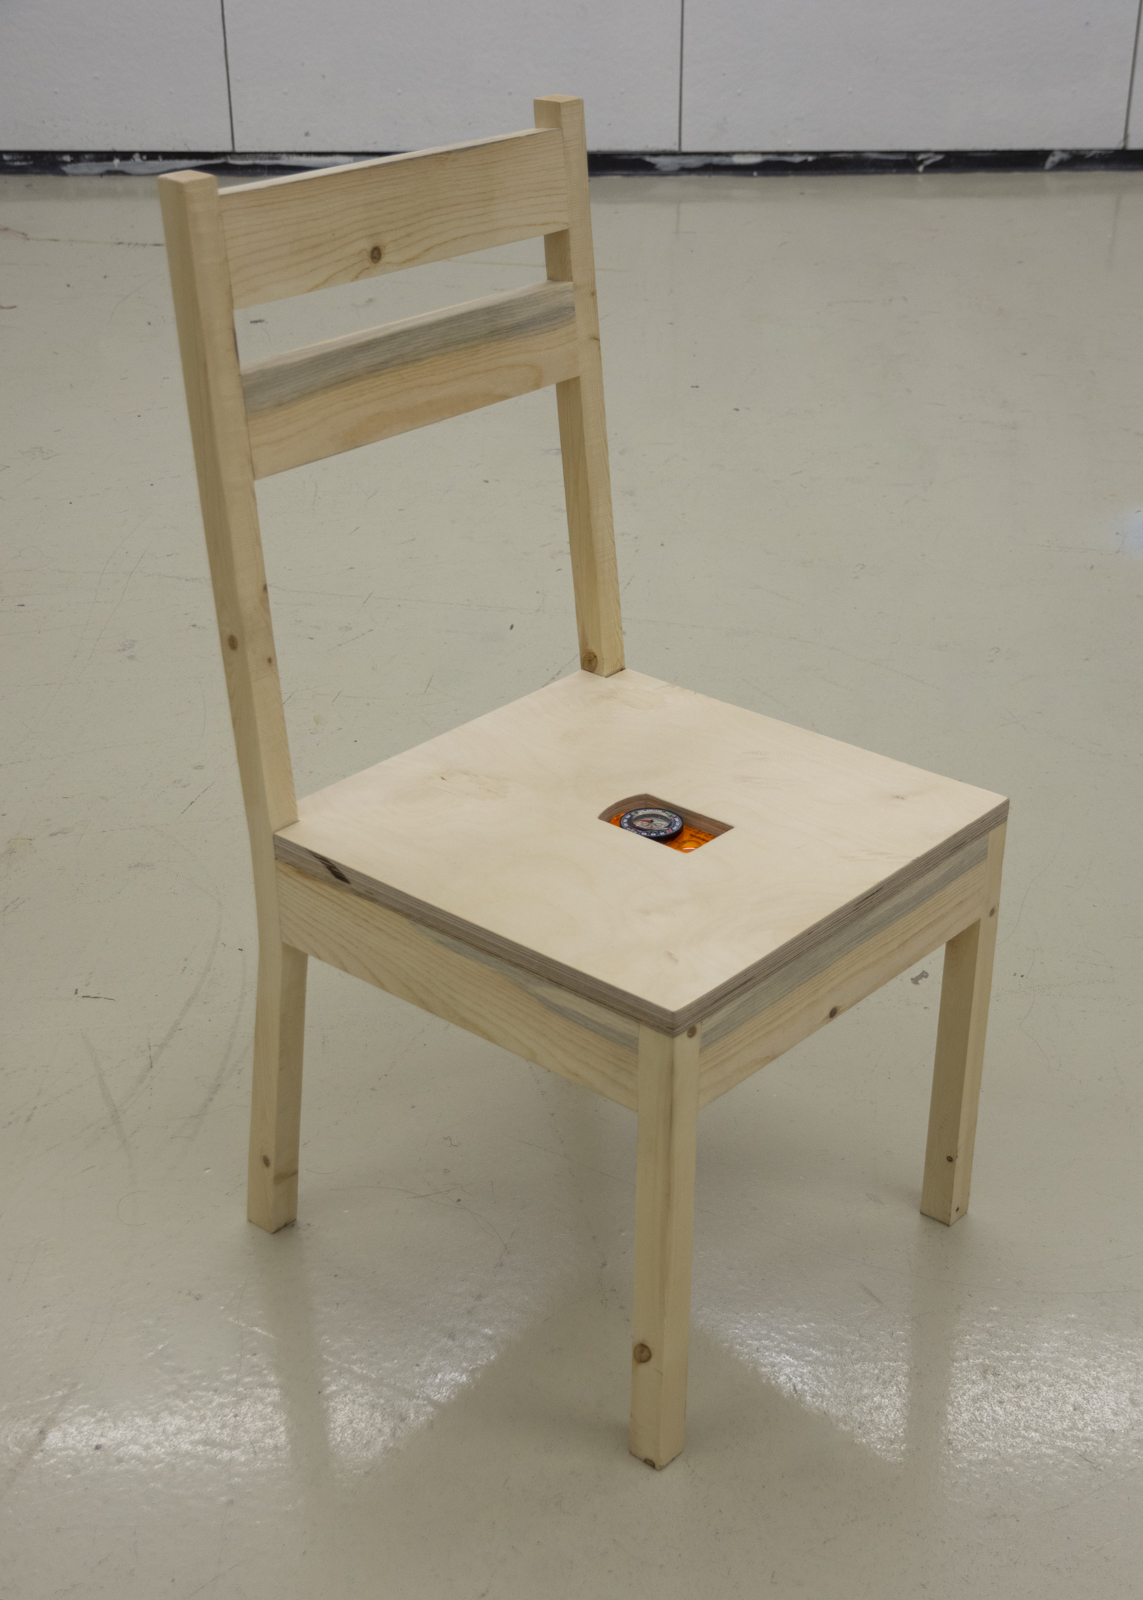 A simple wooden chair, with four legs and a backrest slightly angled back. In the seat of the chair is a specifically shaped divet that holds a compass.